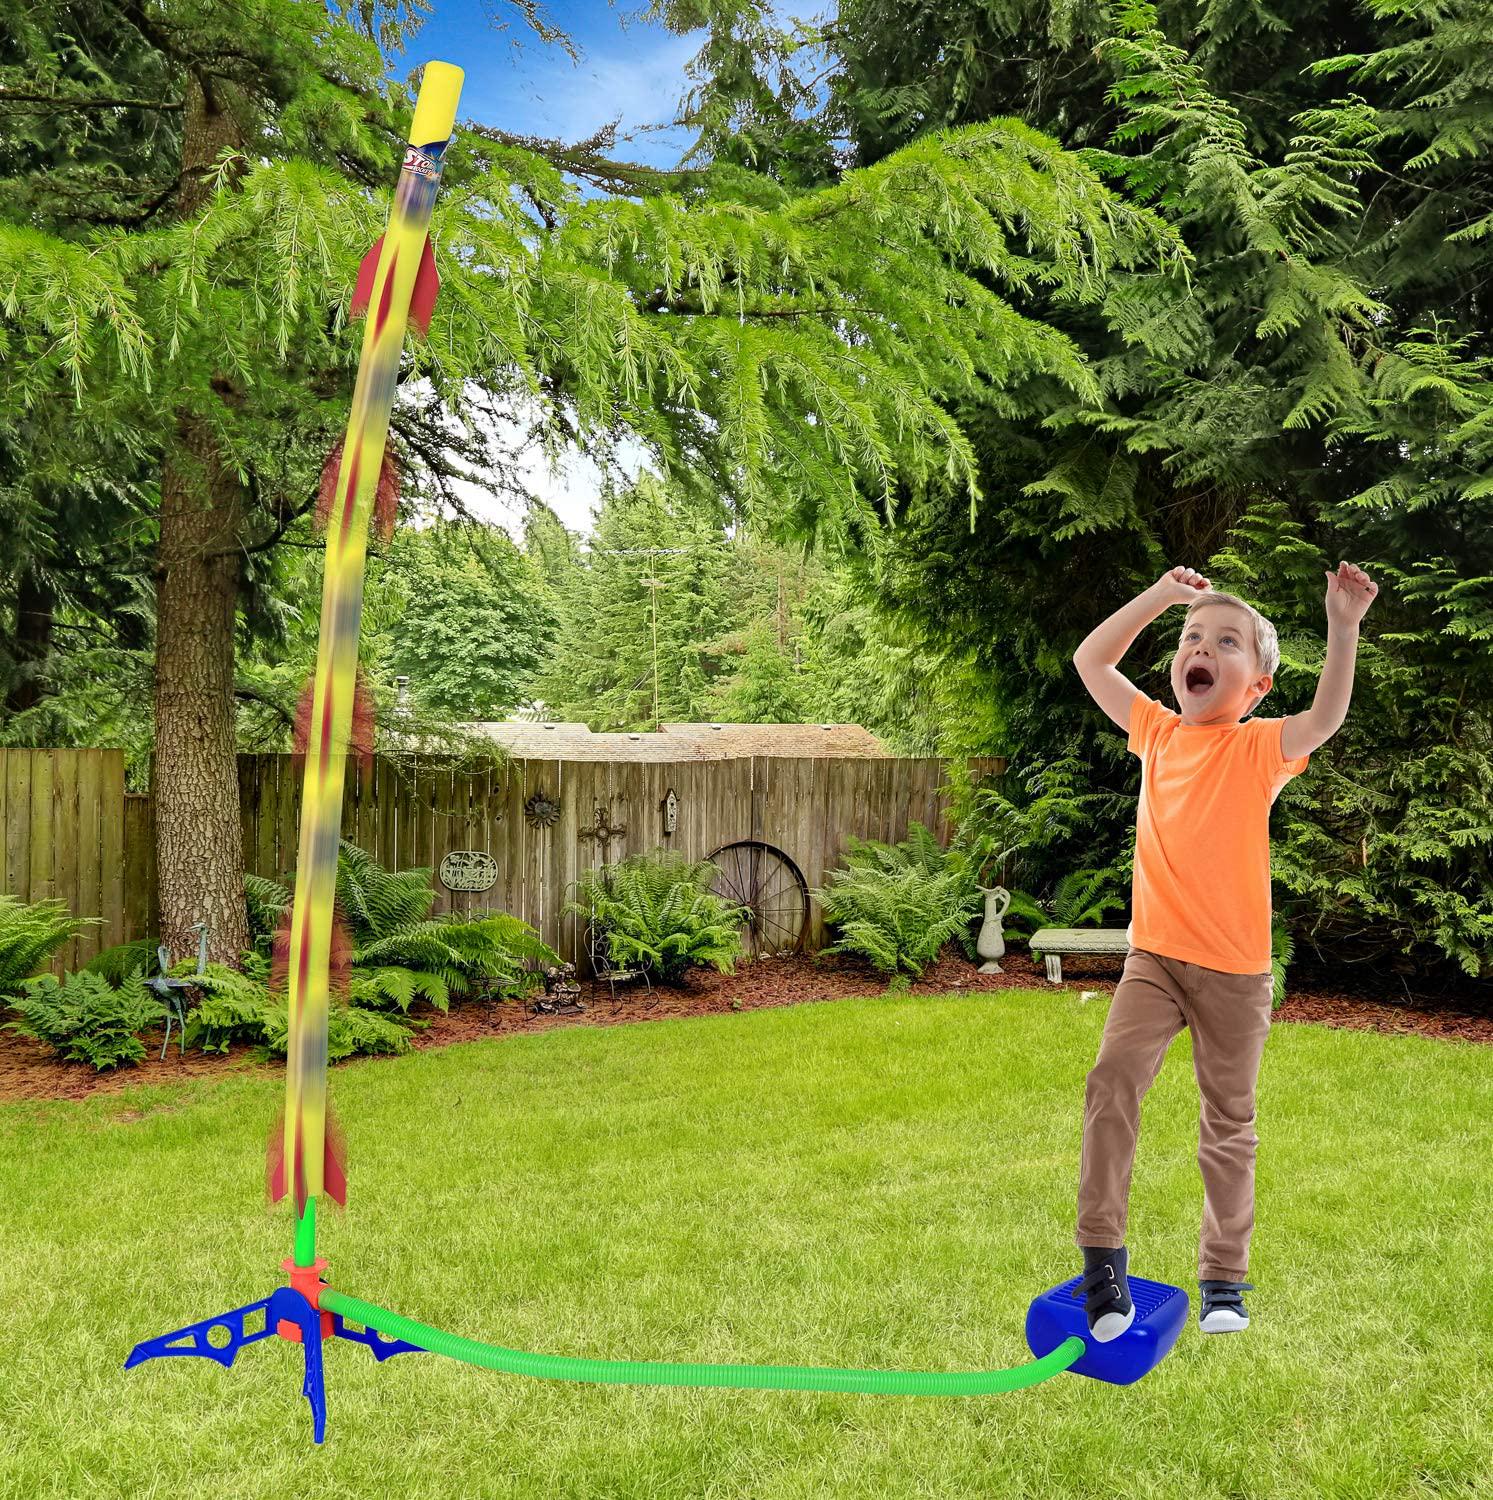 Kiddie Play, Kiddie Play Rocket Launcher for Kids to Stomp on with 6 Rockets Outdoor Toys Gift for Boys and Girls Ages 6 Years and Up